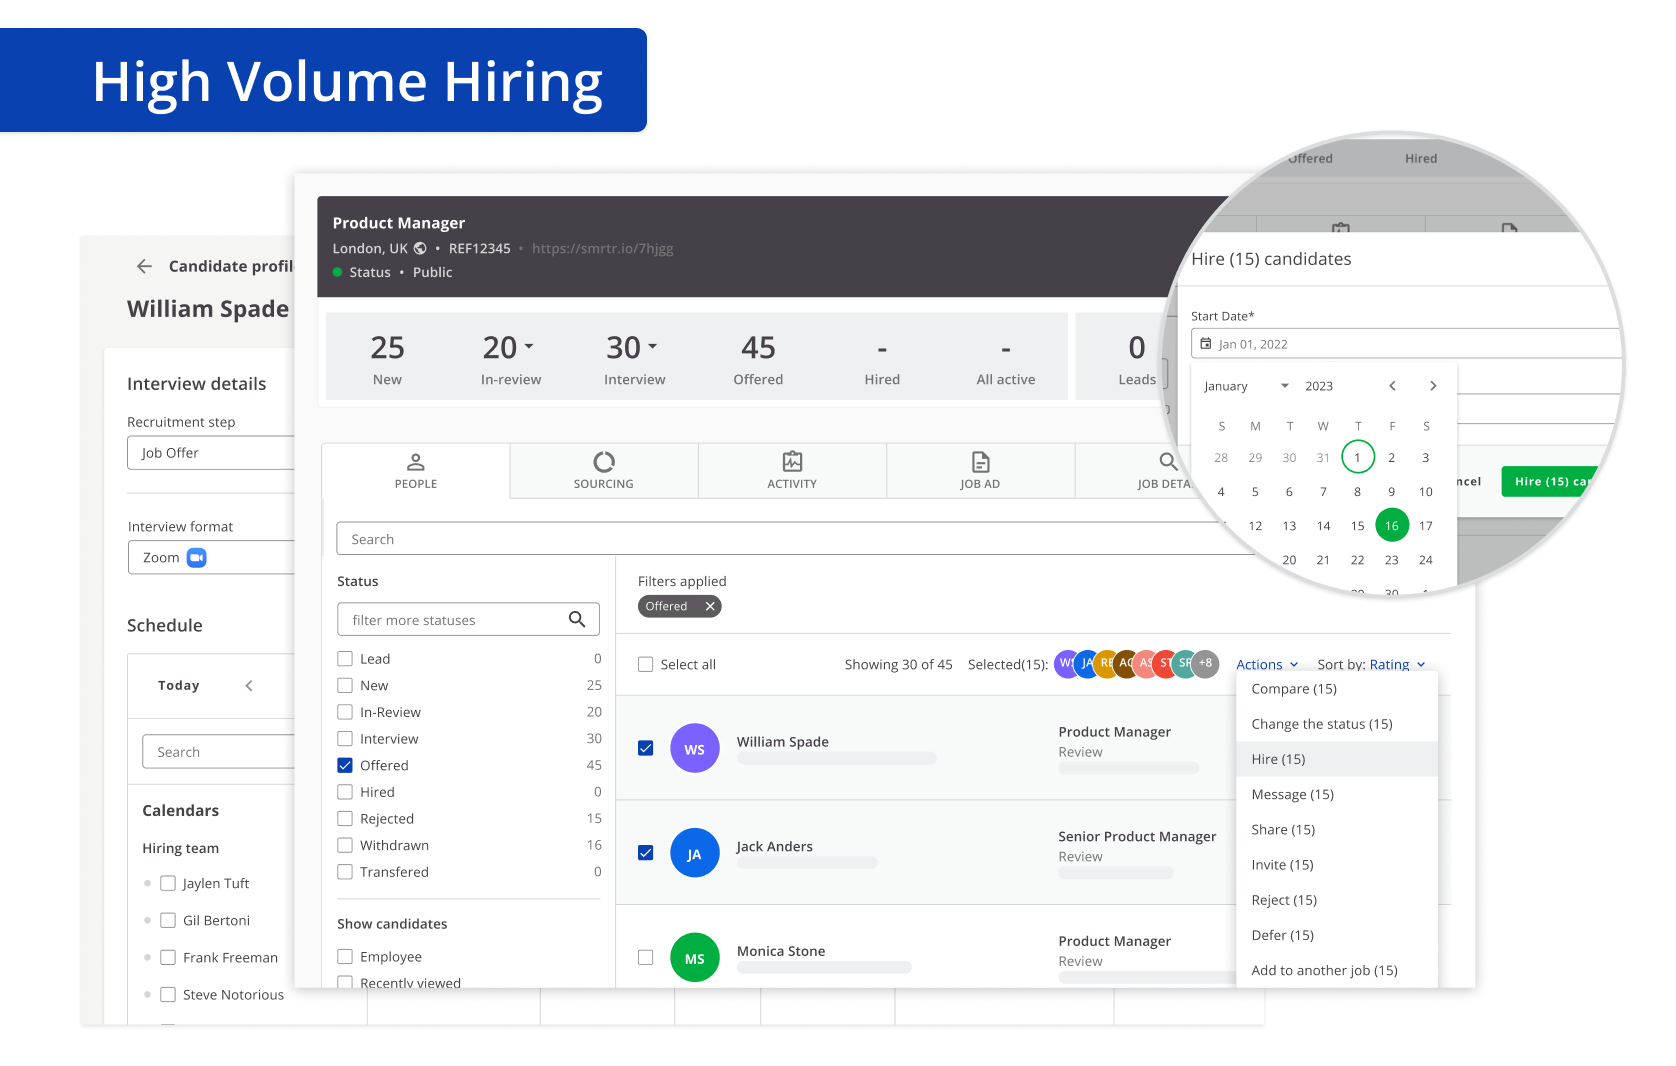 Hiring at scale made easy. SmartRecruiters eases the burden of juggling multiple open roles and hiring large volumes, fast.